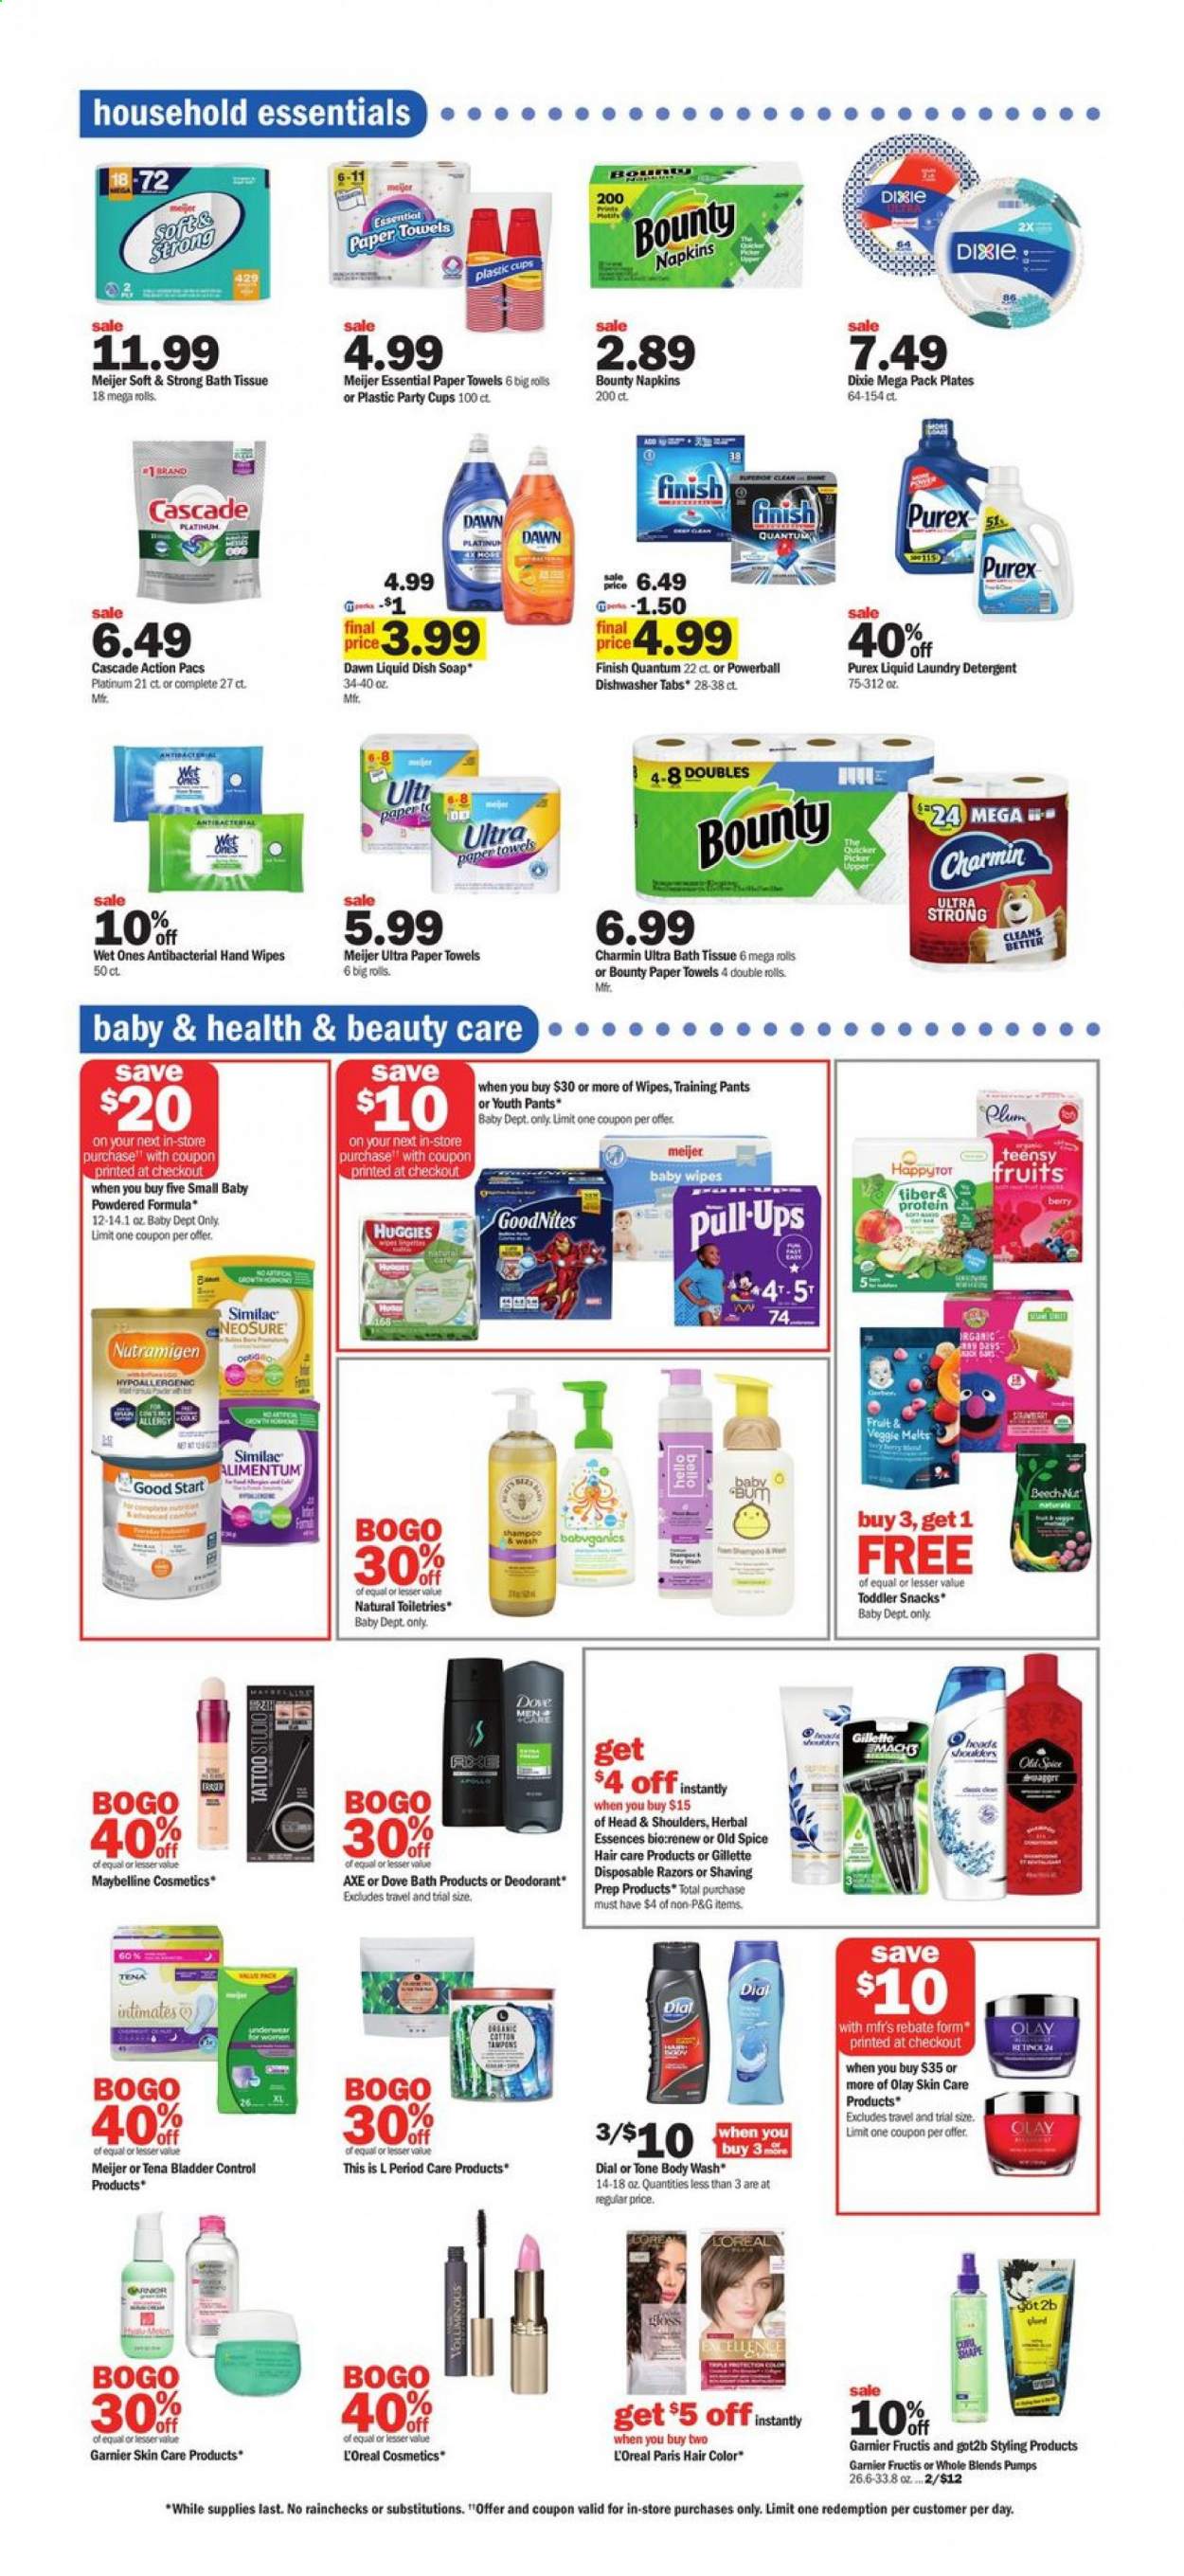 thumbnail - Meijer Flyer - 09/05/2021 - 09/11/2021 - Sales products - snack, Bounty, spice, Similac, wipes, Huggies, pants, baby wipes, napkins, baby pants, bath tissue, kitchen towels, paper towels, Charmin, detergent, Cascade, laundry detergent, Purex, Finish Powerball, Finish Quantum Ultimate, body wash, Dove, Old Spice, Dial, soap, Garnier, L’Oréal, Olay, Head & Shoulders, hair color, Herbal Essences, Fructis, Maybelline, anti-perspirant, deodorant, Gillette, disposable razor, plate, cup, underwear. Page 15.